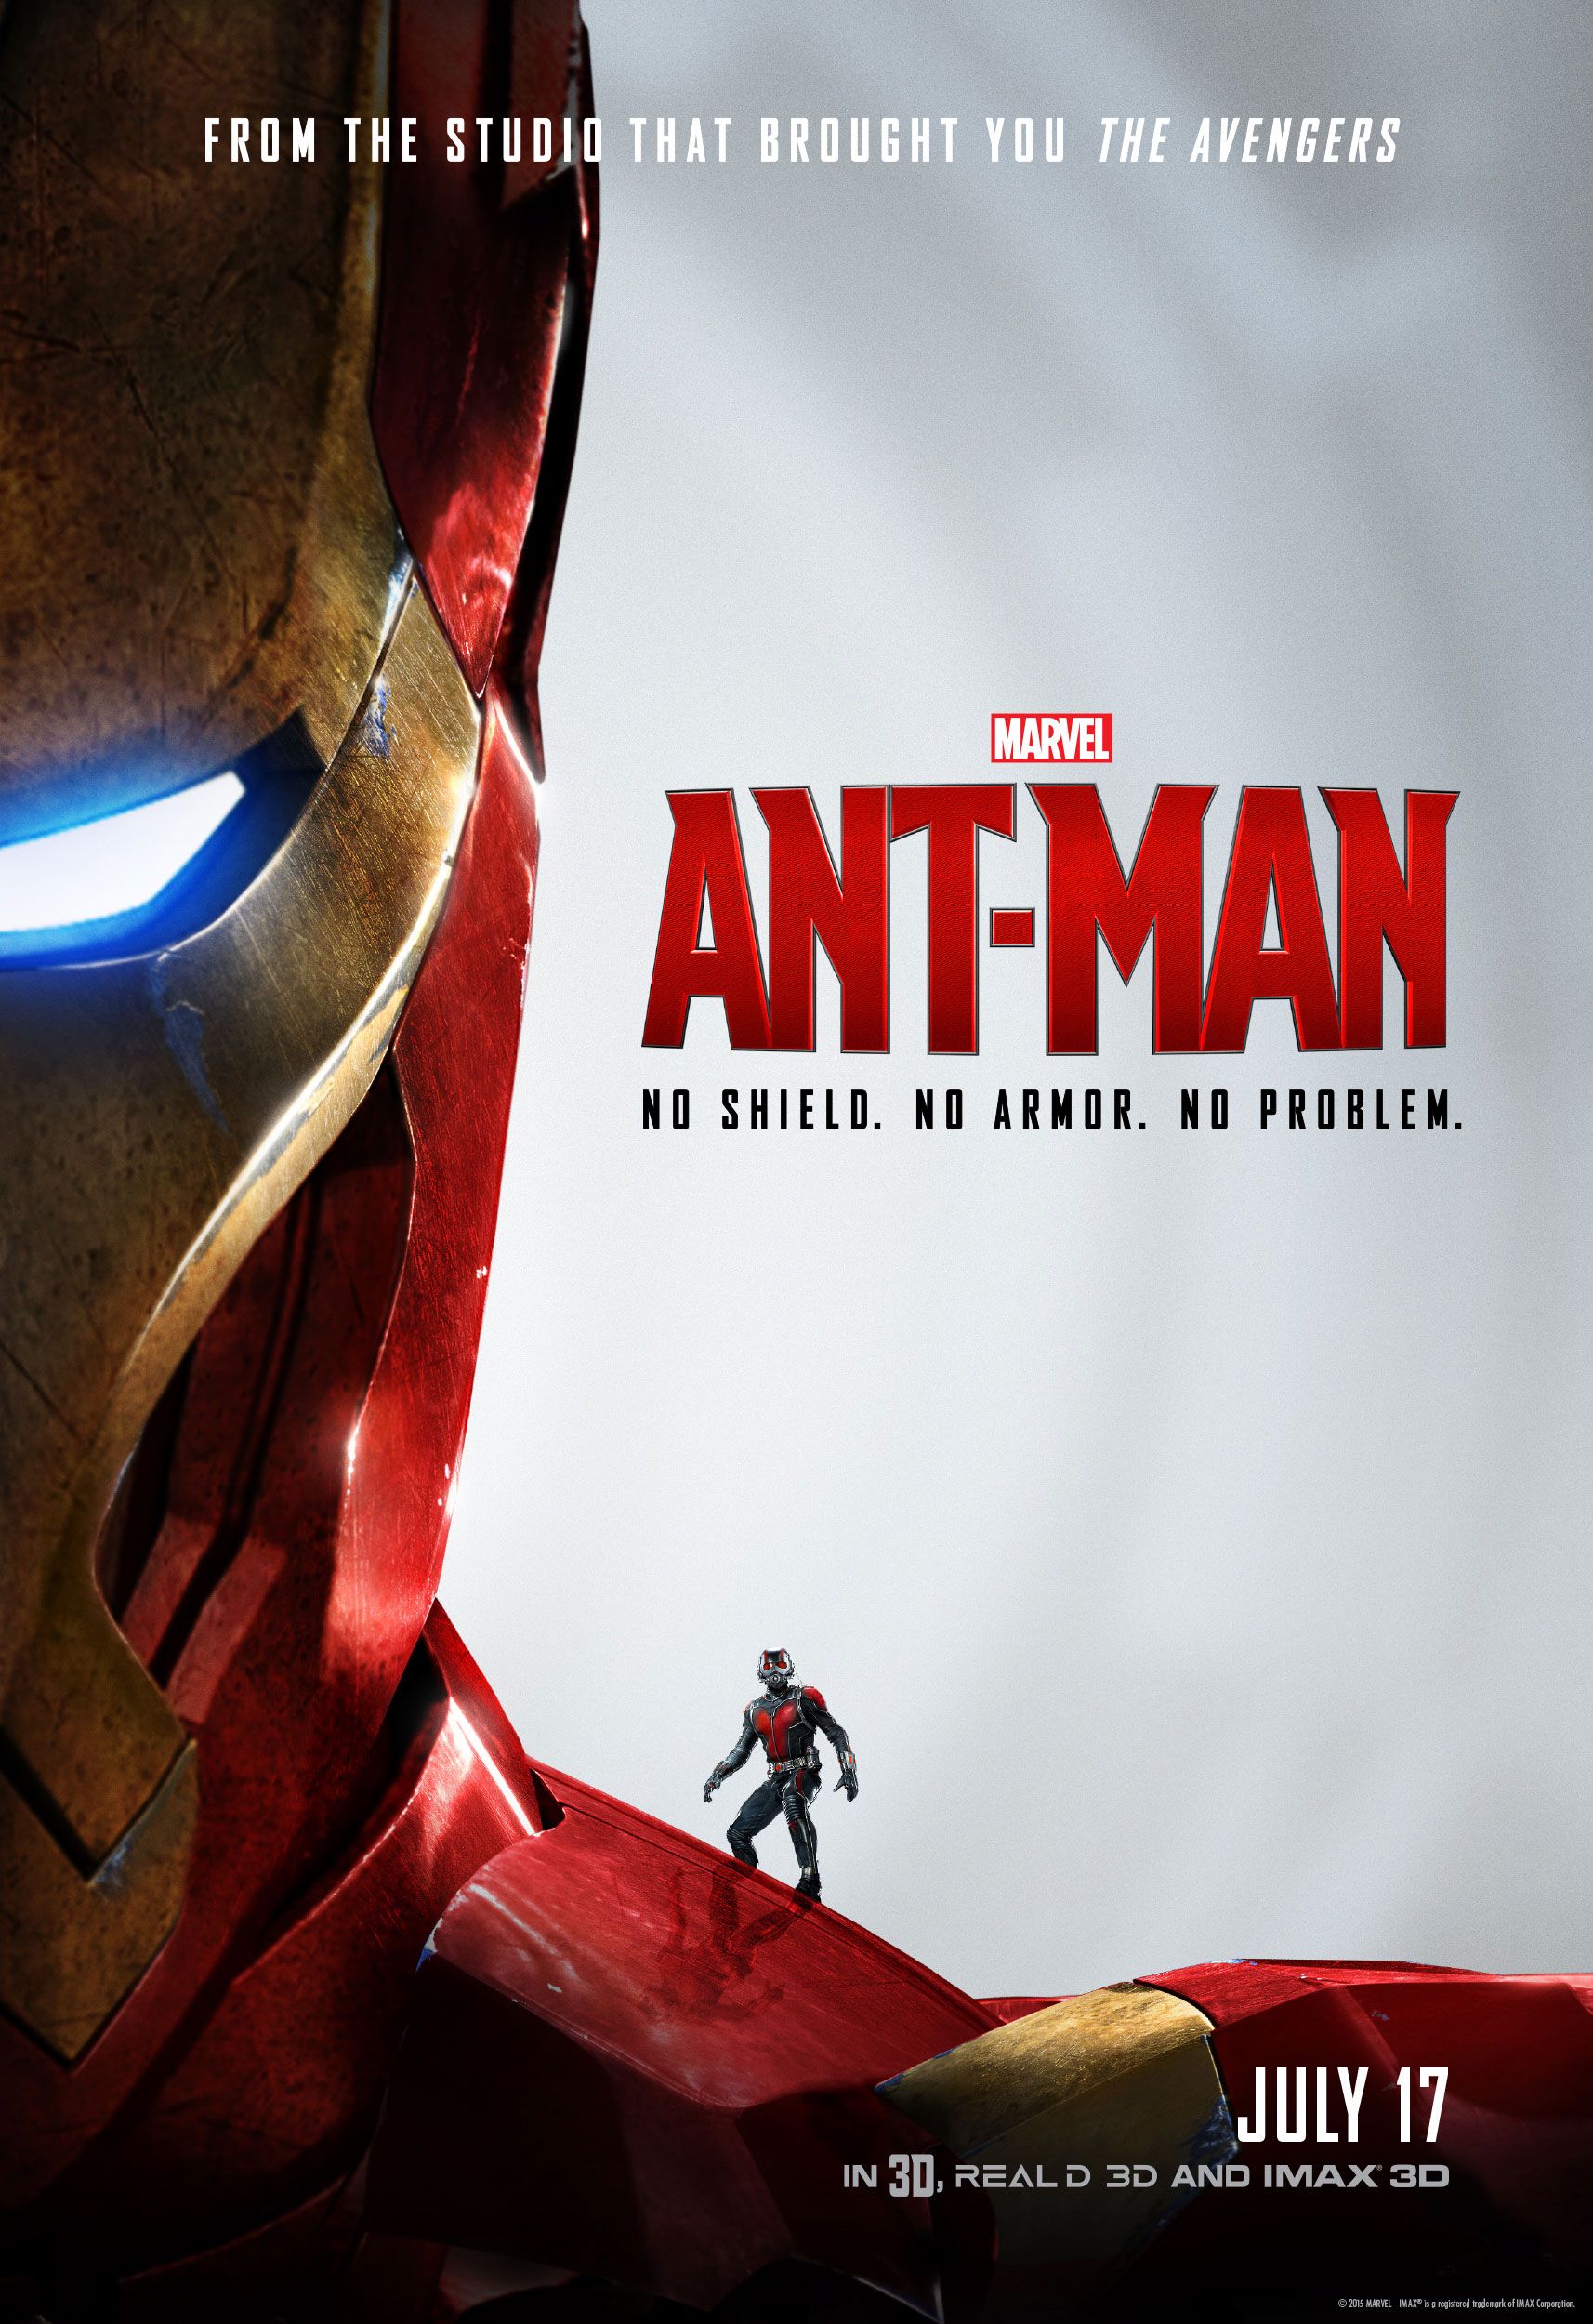 Ant Man Posters Feature Title Hero Posed with the Avengers